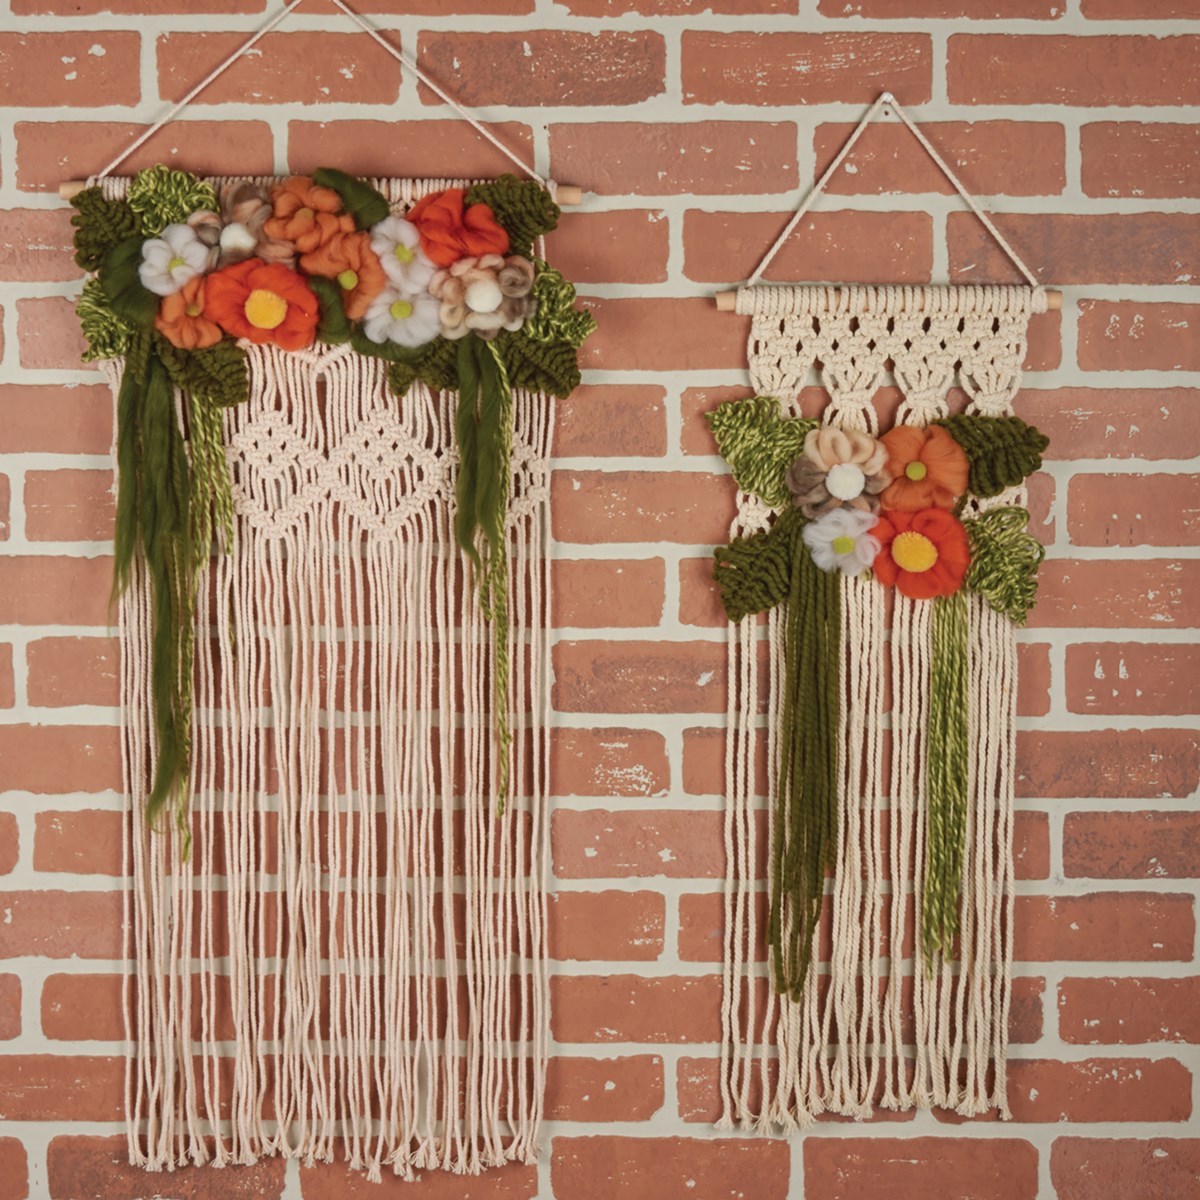 Wall Hanging Med - Blooms - 10.25" x 31.50" - Polyester, Wood